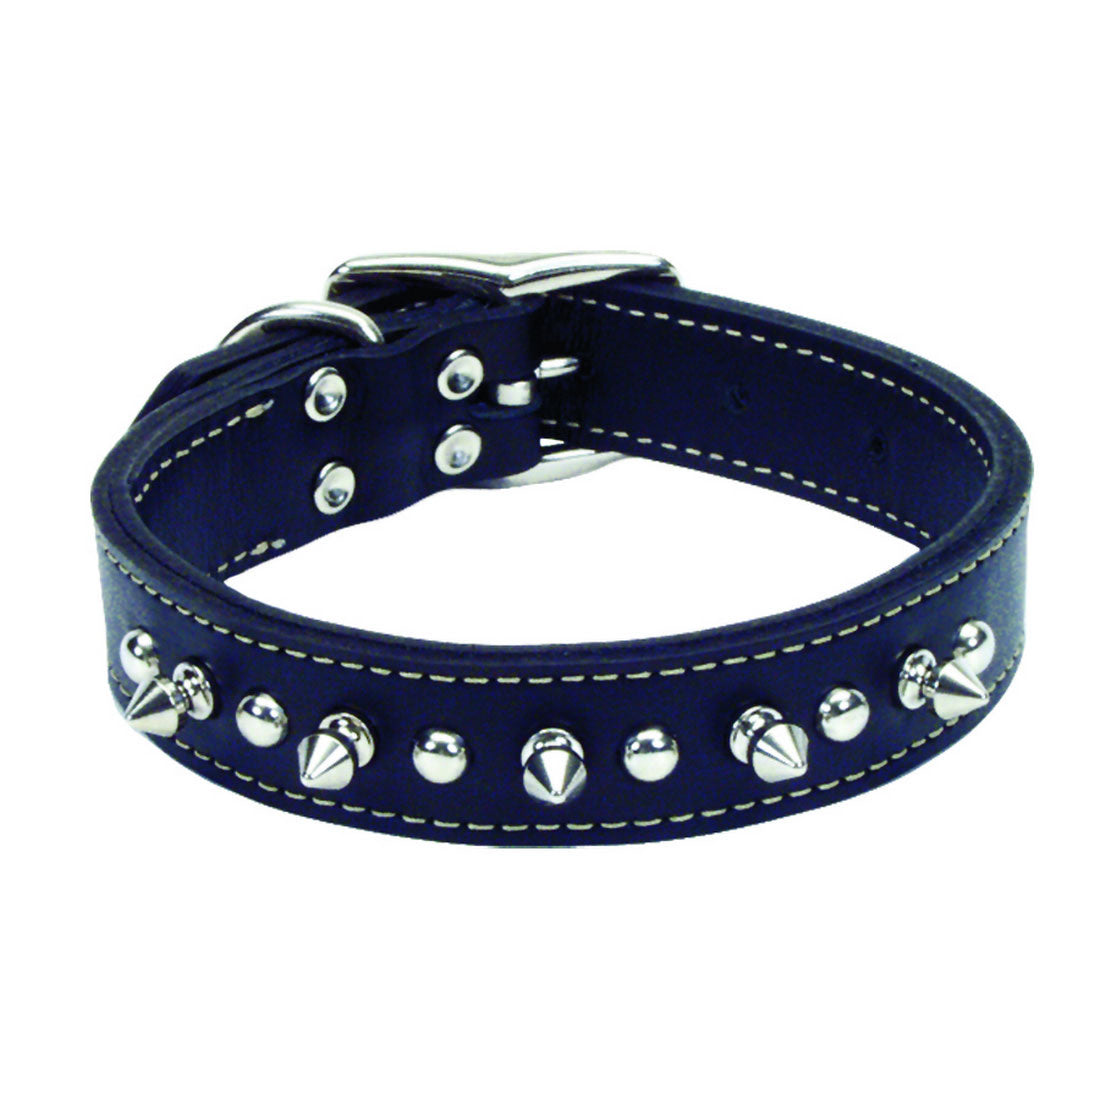 Circle T Oak Tanned Leather Double-Ply Spiked Dog Collar